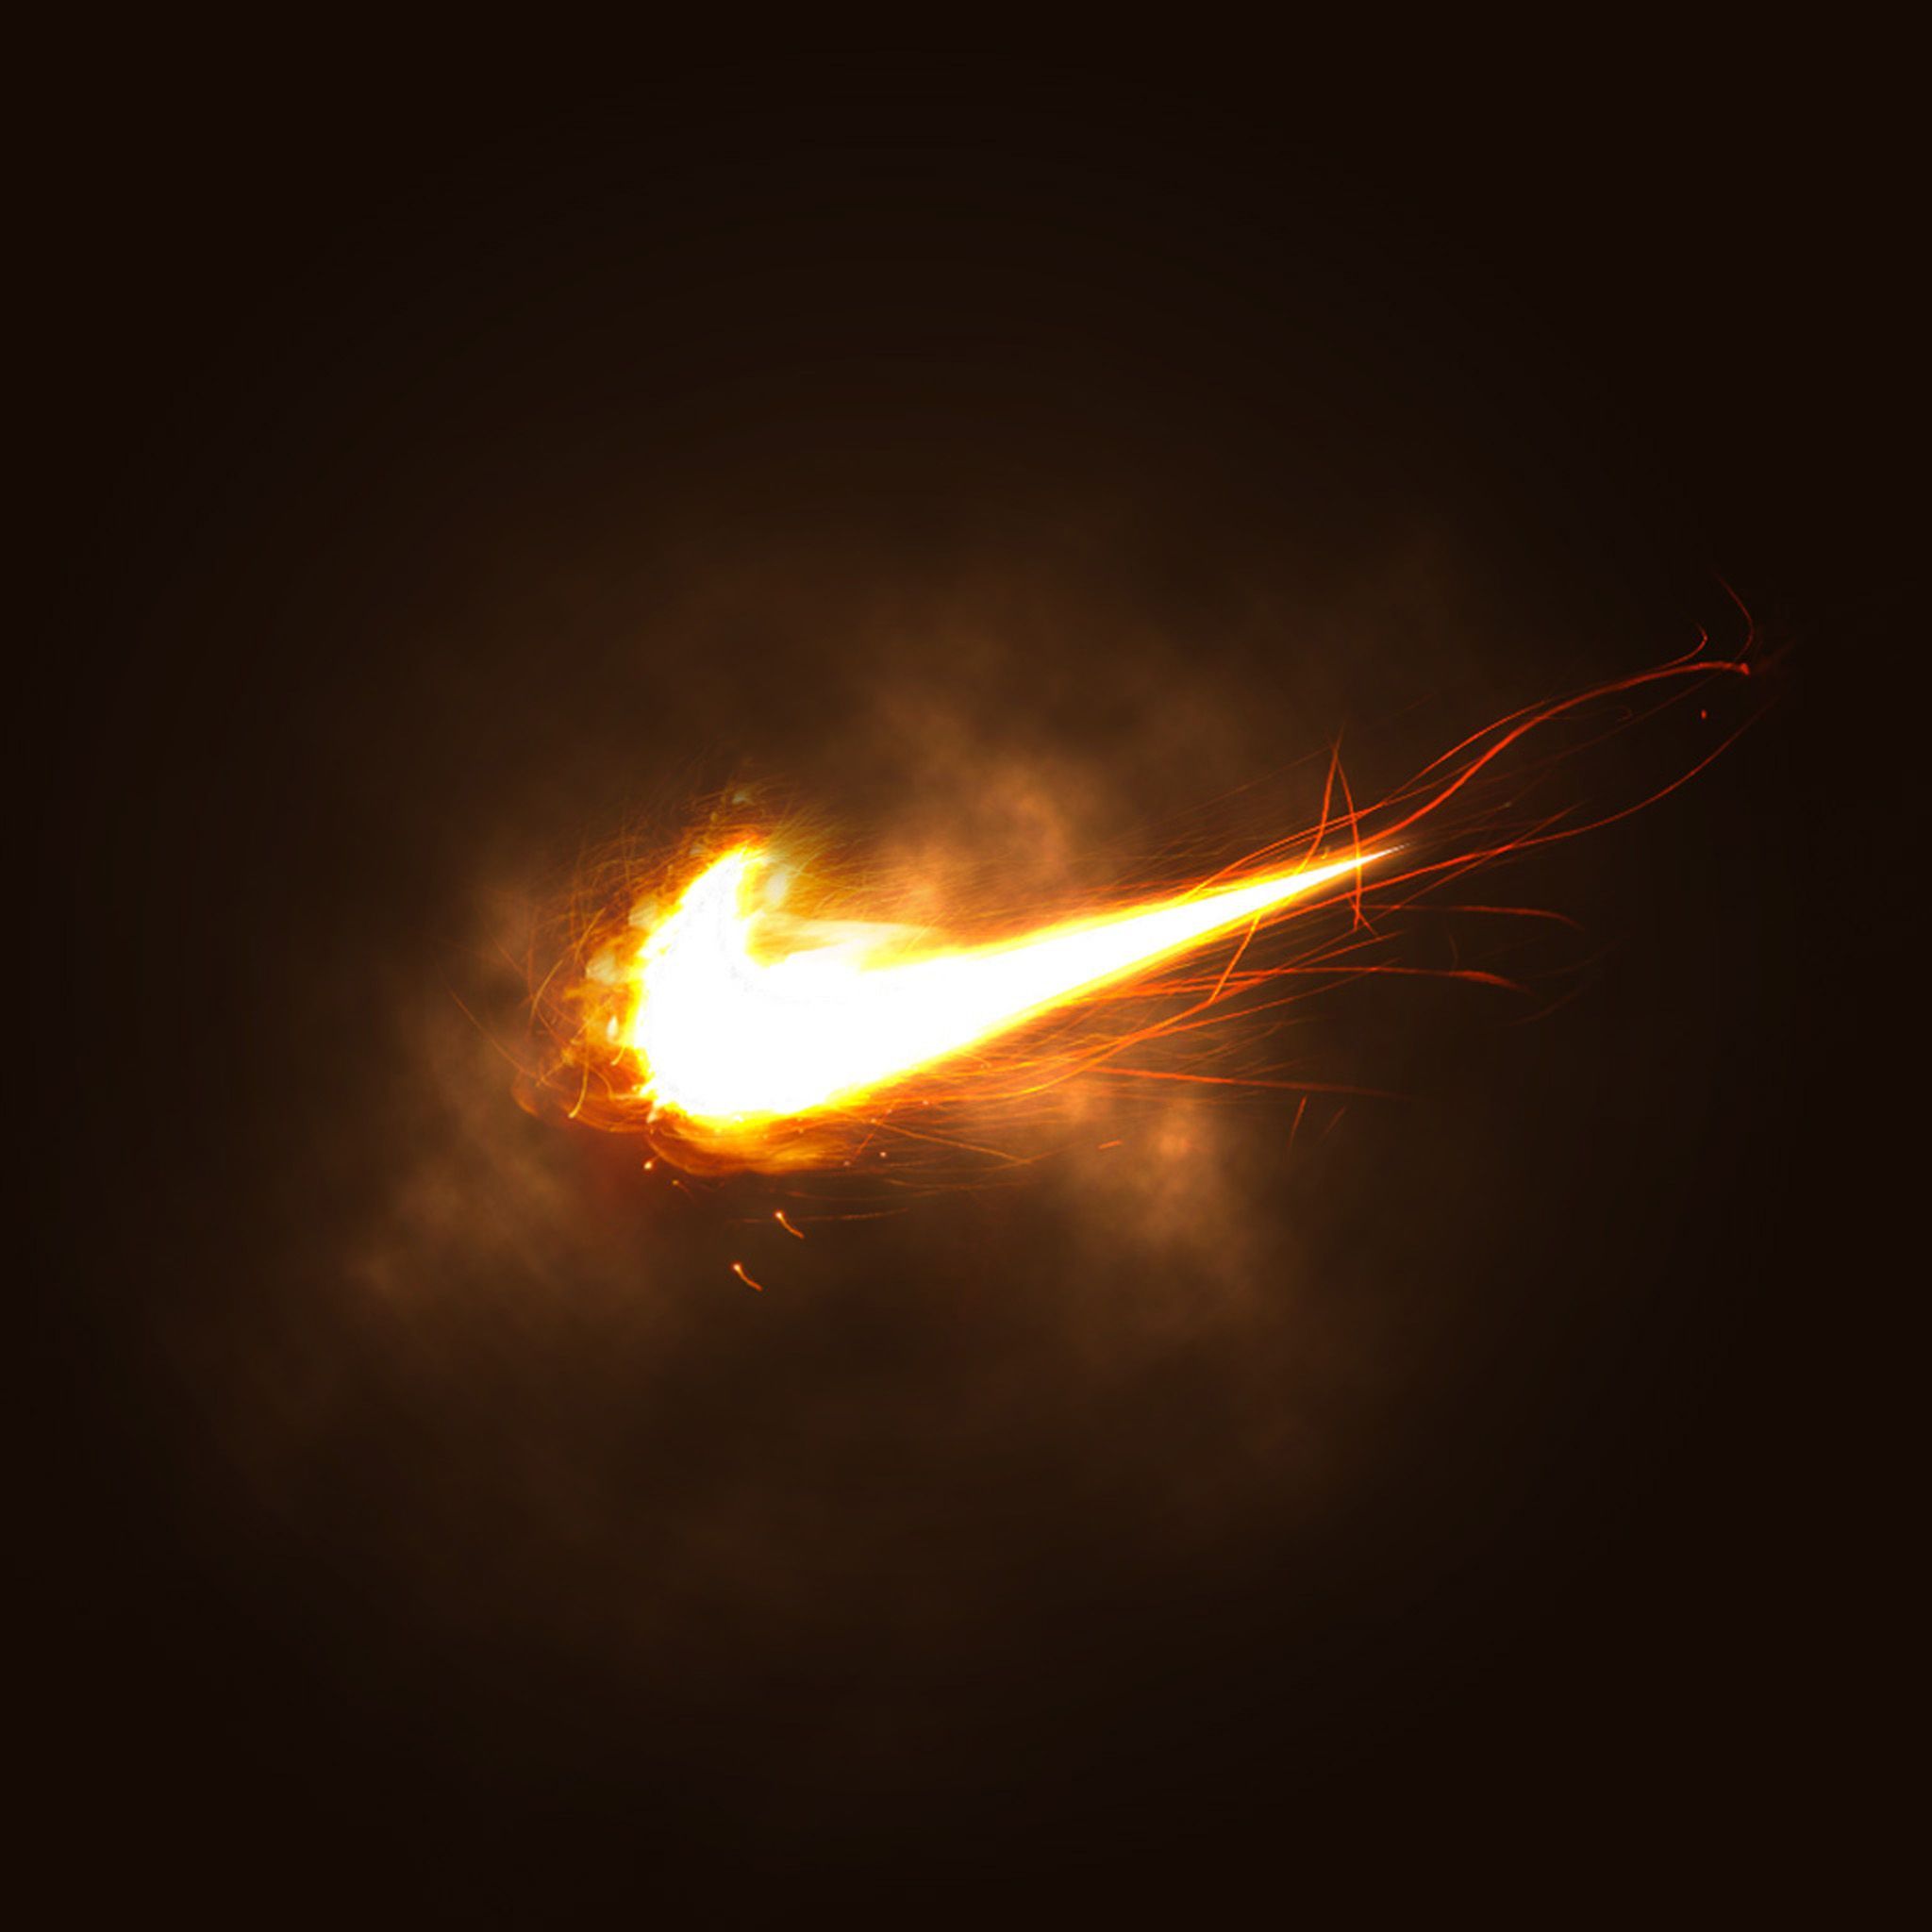 Nike On Fire to see more #Nike #Wallpaper -@mobile9